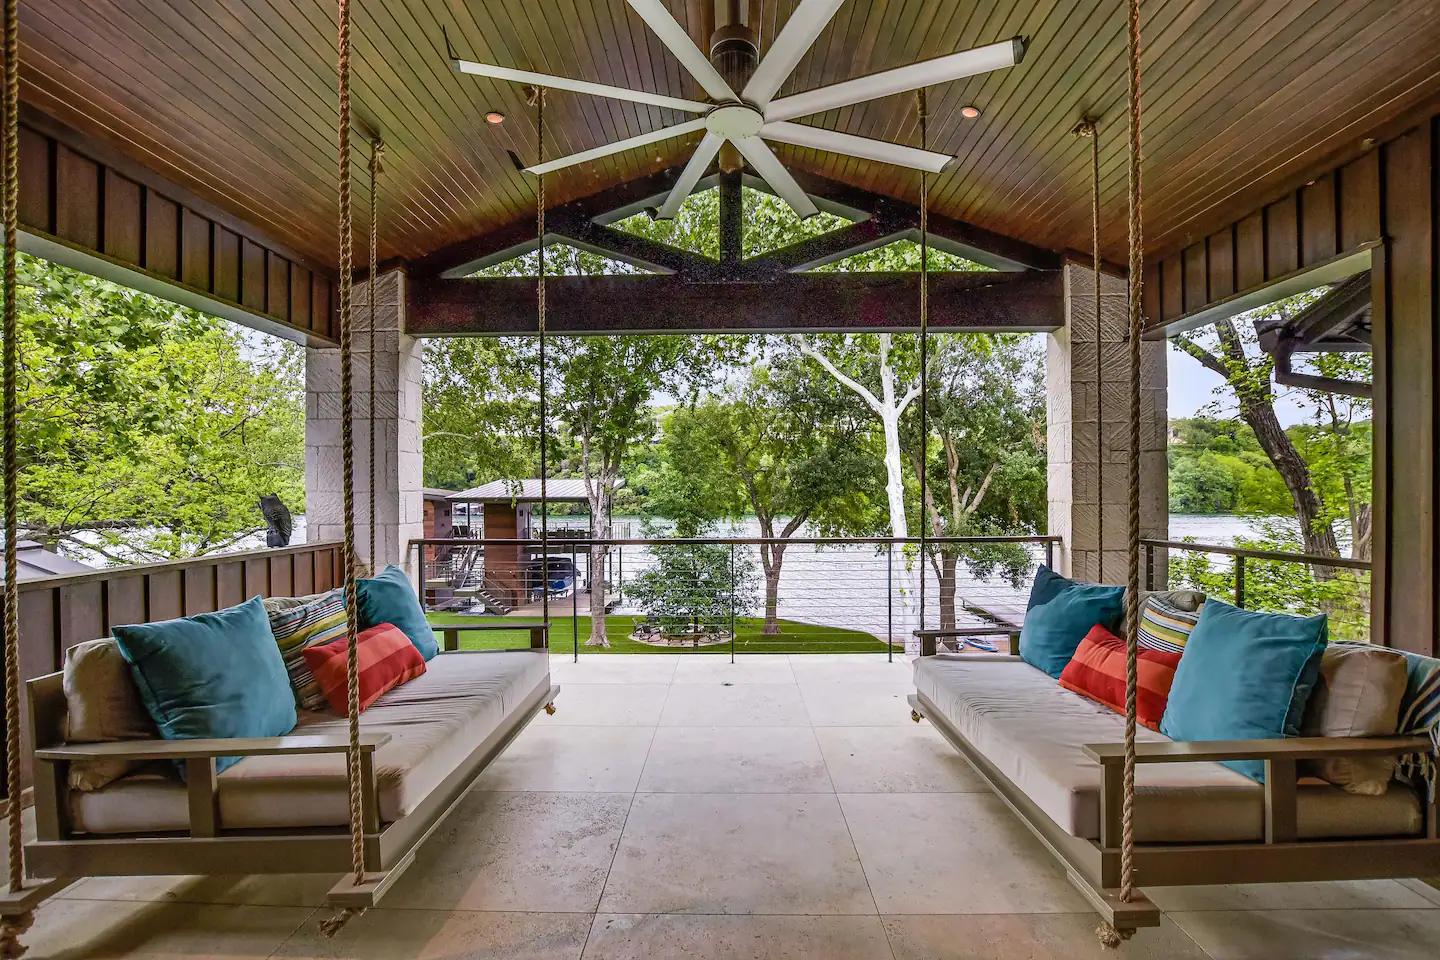 Savor the panoramic lake vista from the spacious balcony porch, complete with daybed swings.